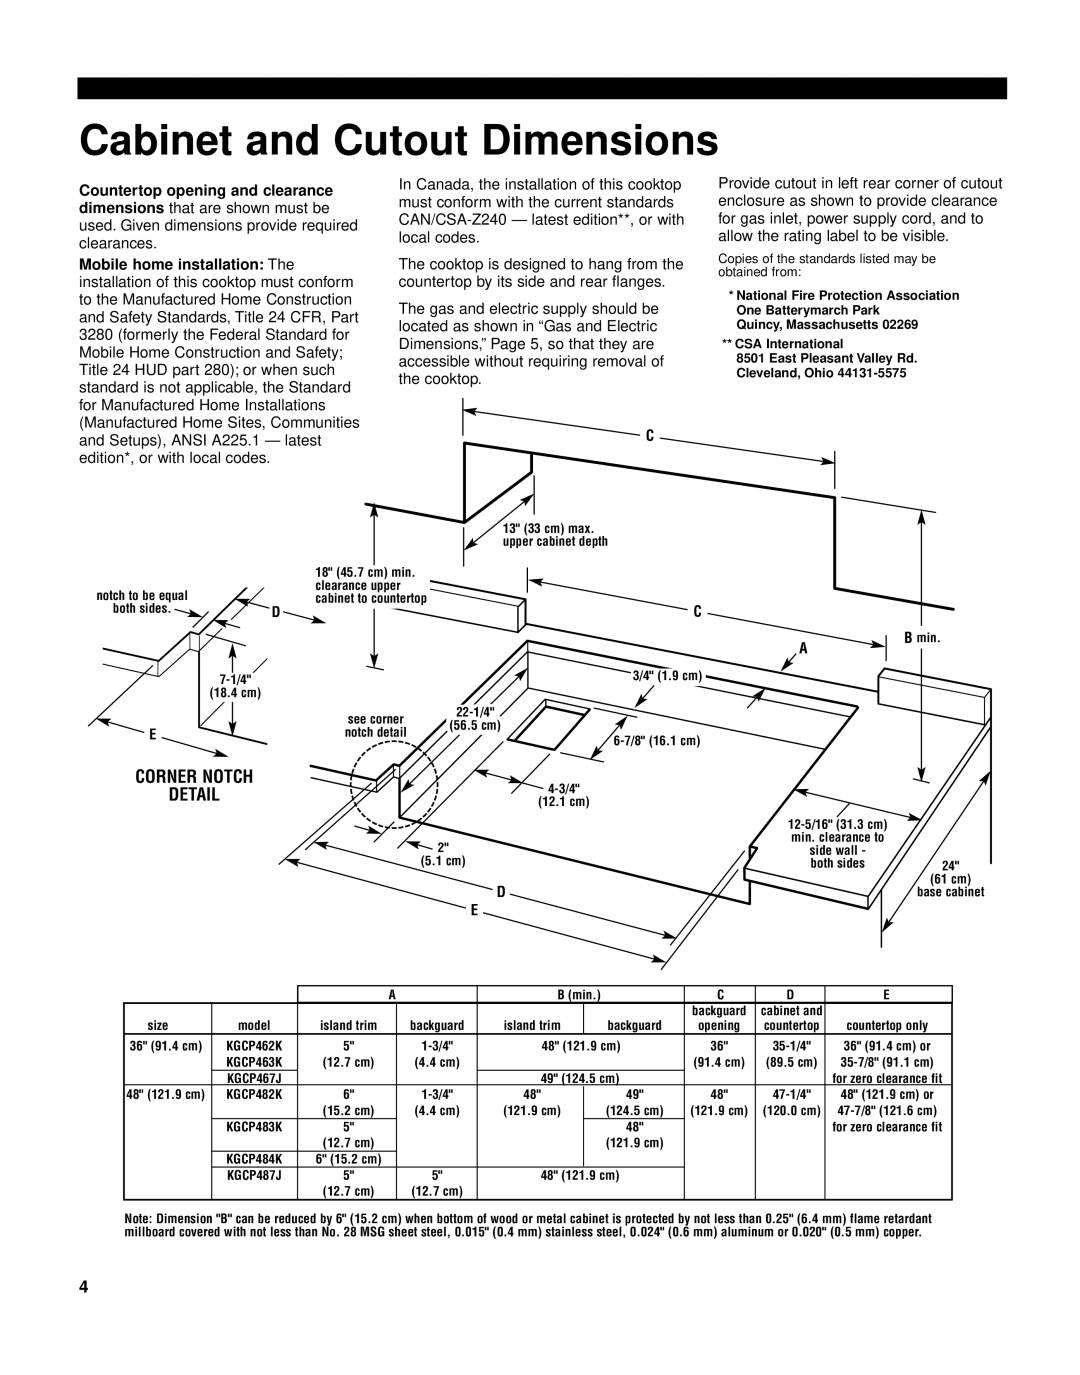 KitchenAid KGCP462K installation instructions Cabinet and Cutout Dimensions, Corner Notch 